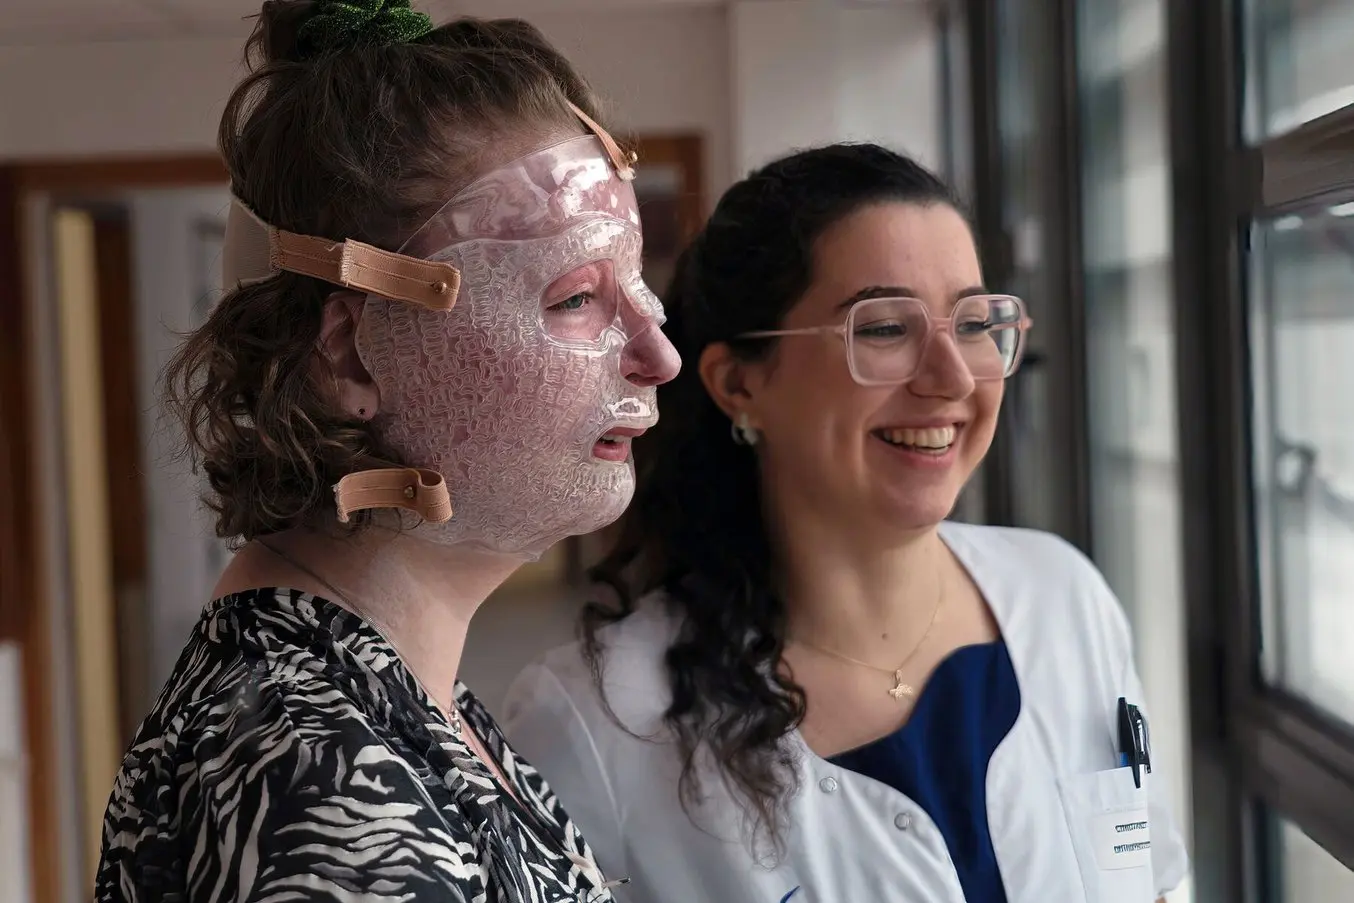 A patient with severe burns wearing a face mask produced with 3D printing.